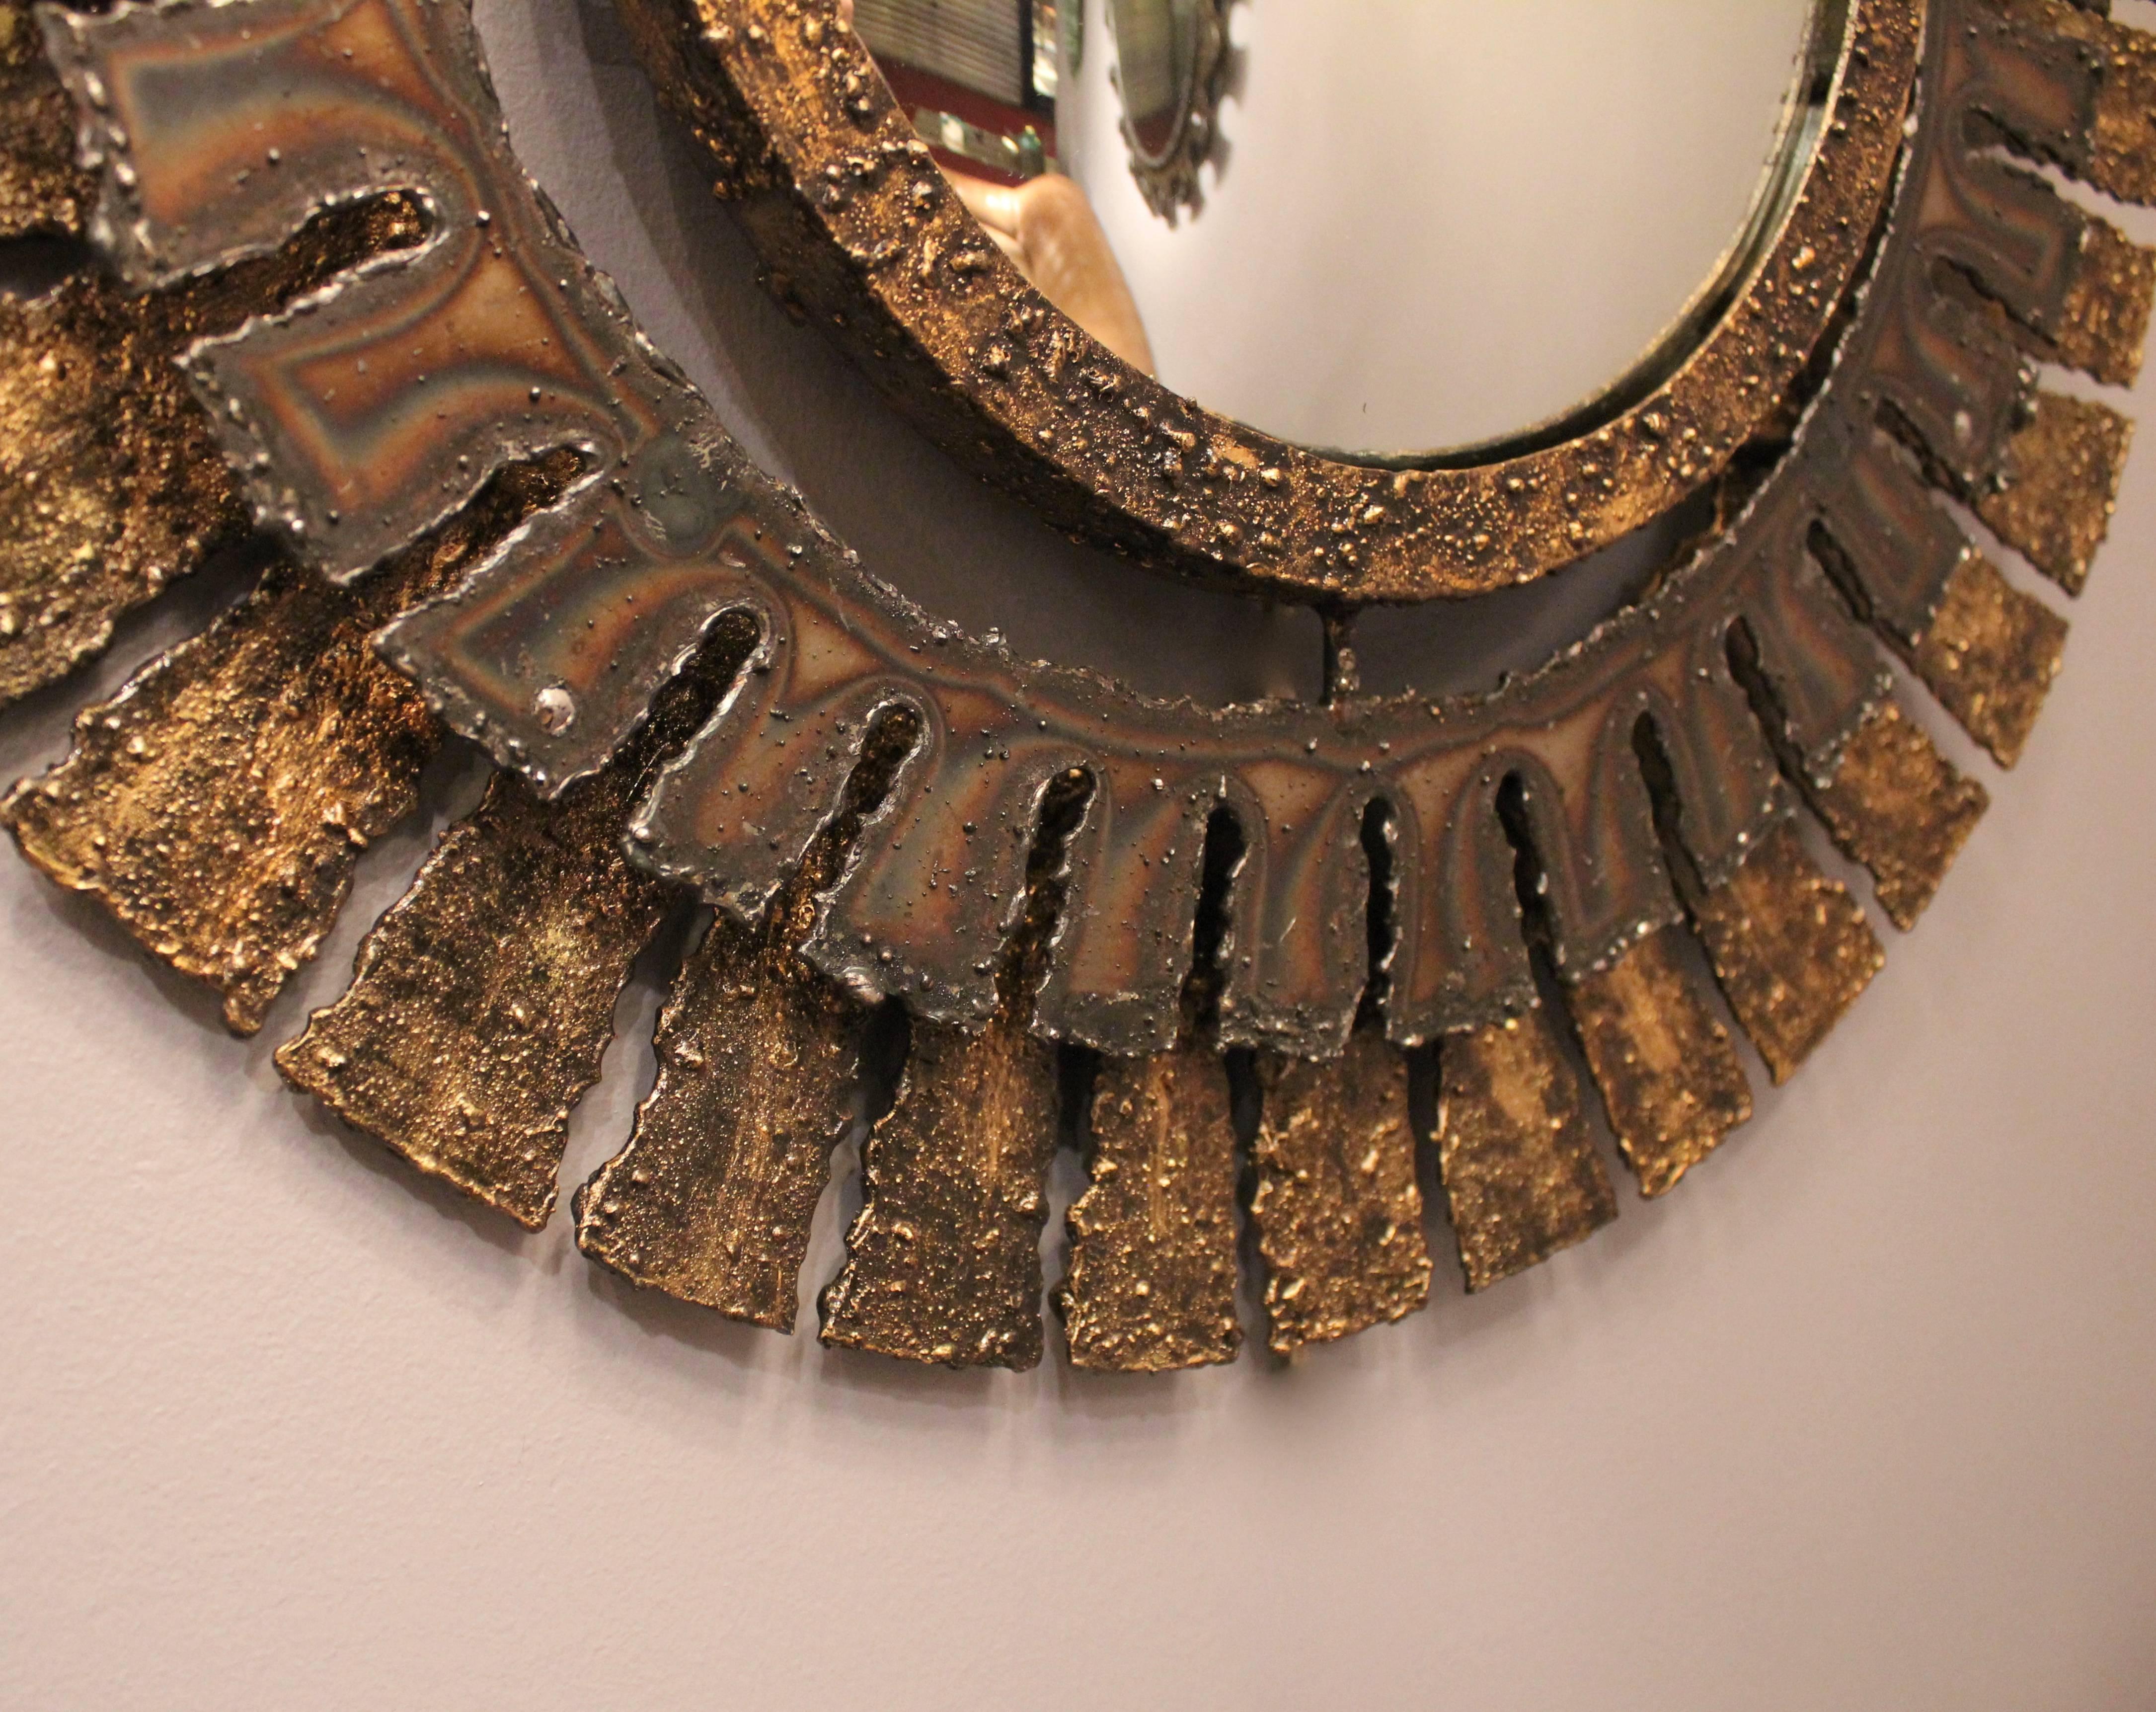 Small convex mirror by the French artist Liger. Patinated steel and stainless steel.
Unique piece made in exclusivity for the gallery.
